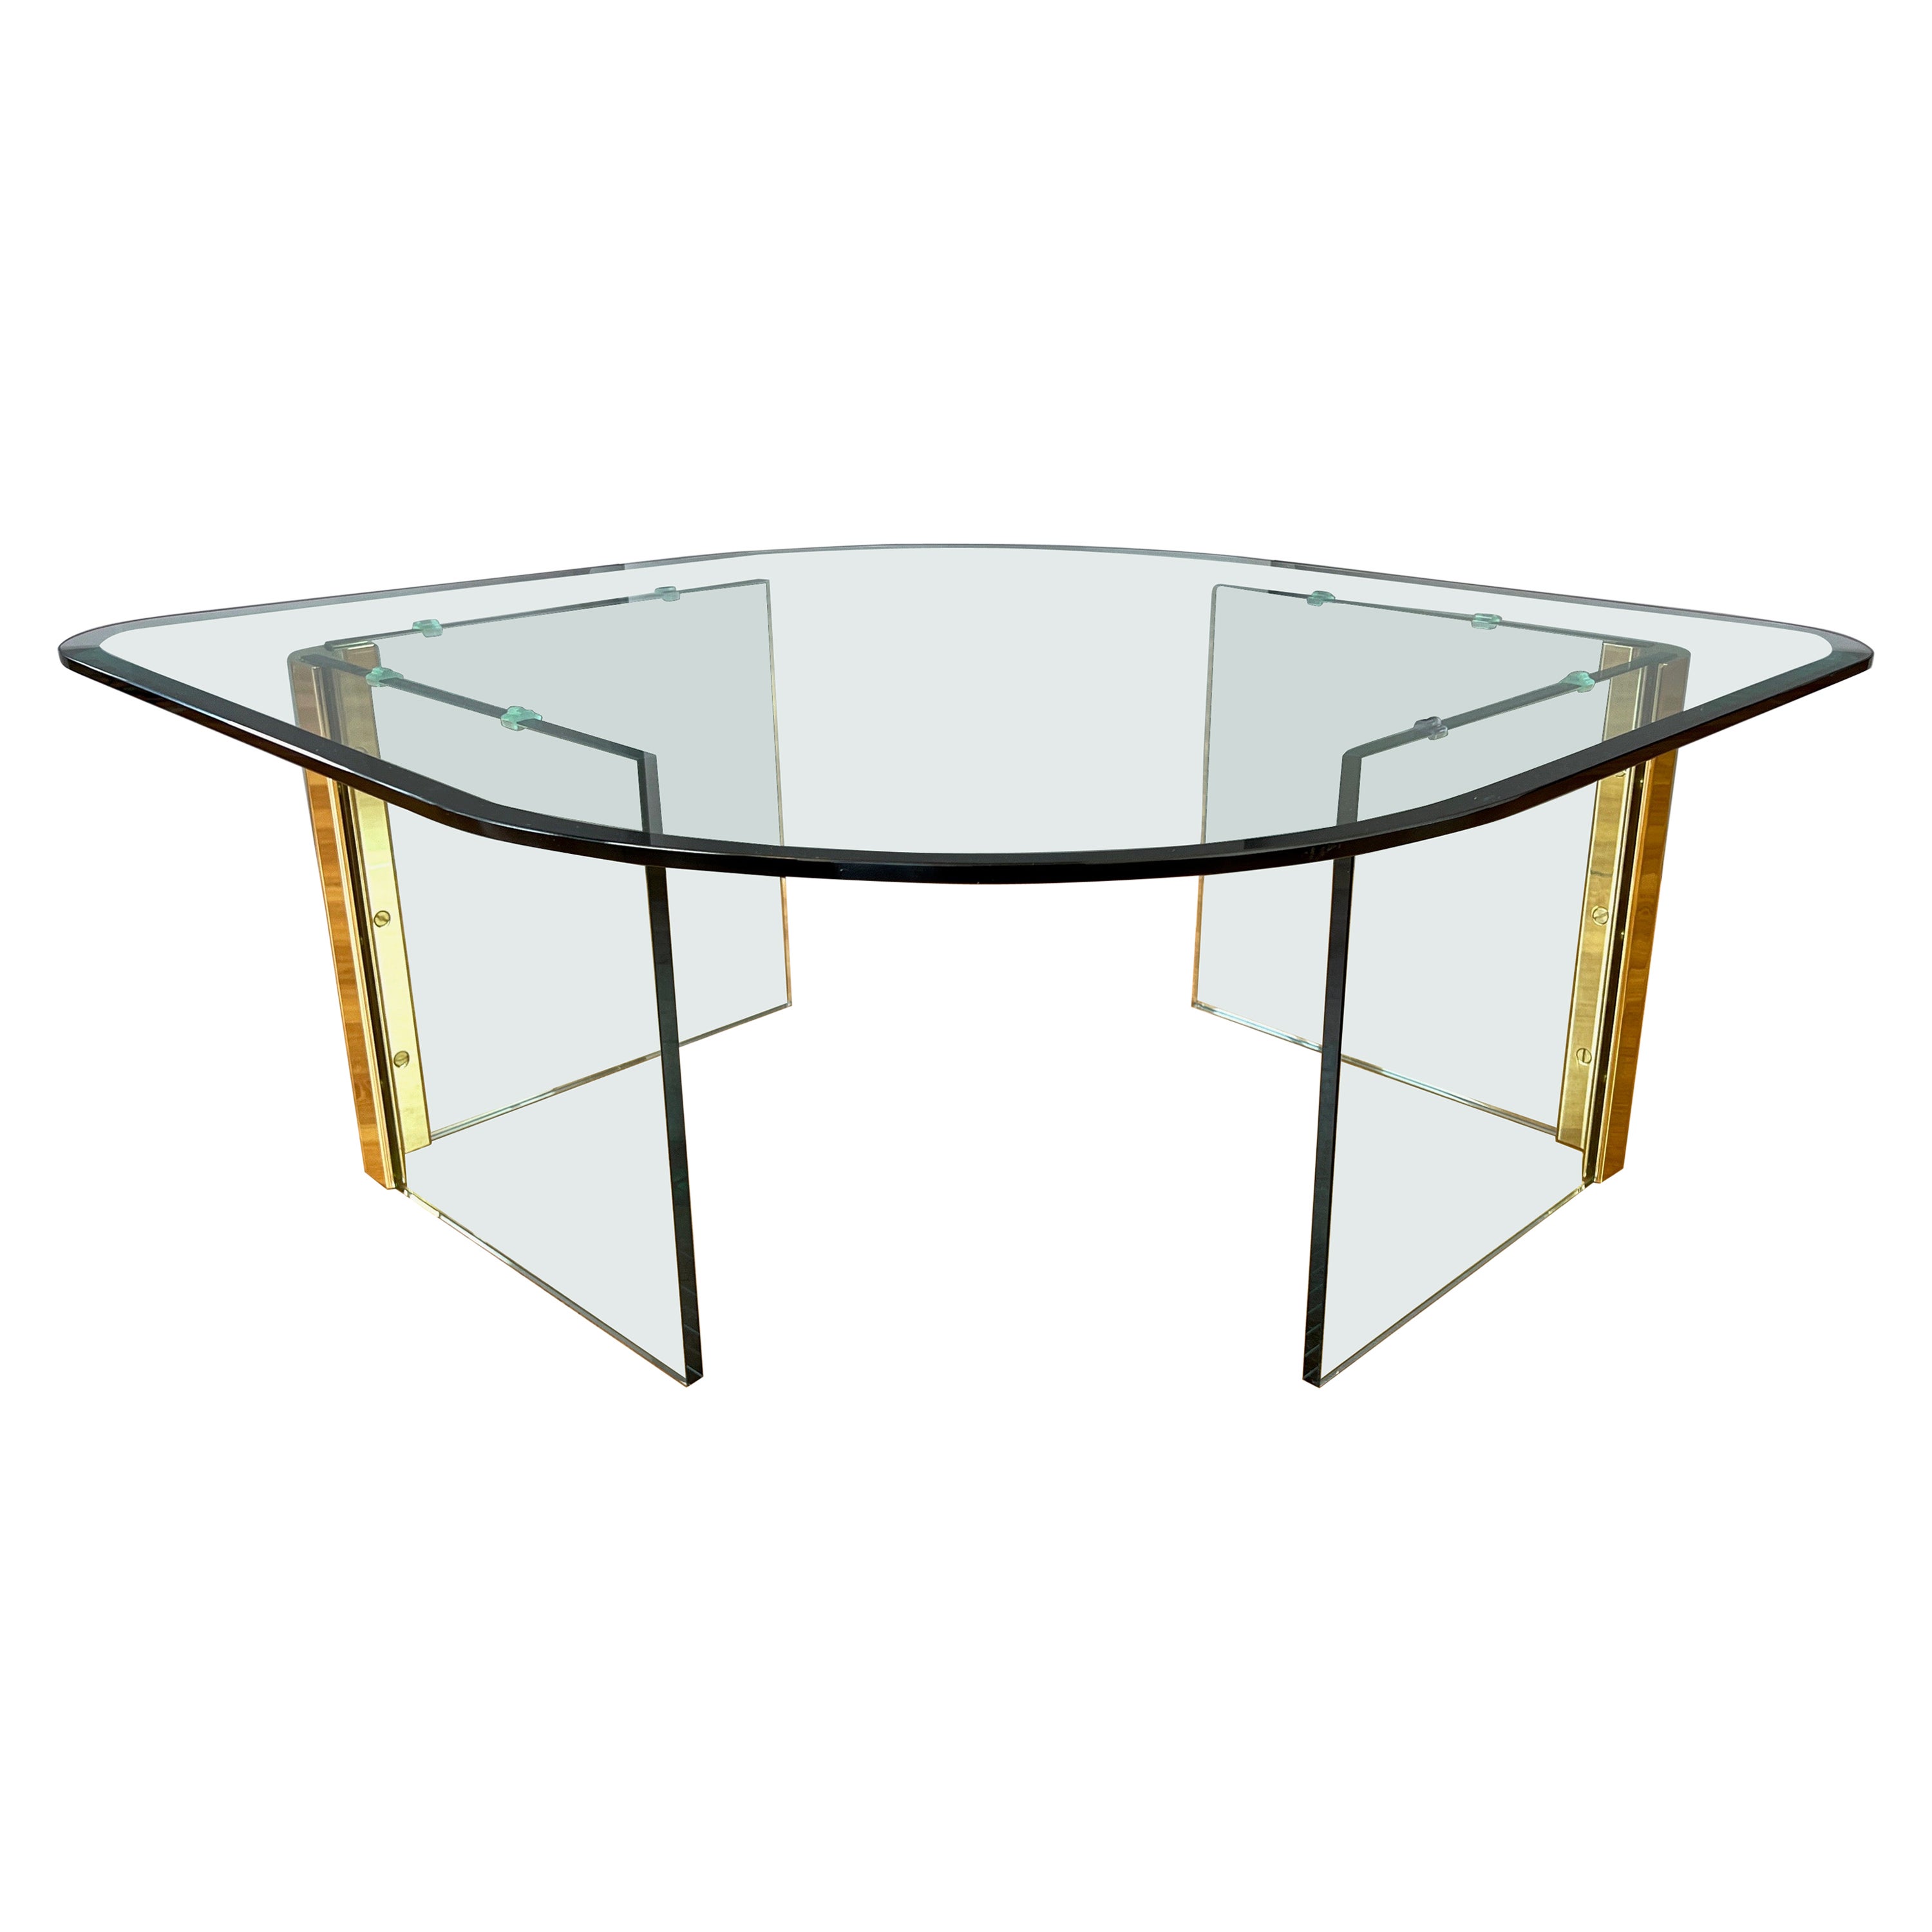 Leon Rosen for The Pace Collection Brass and Glass Coffee Table, 1970s